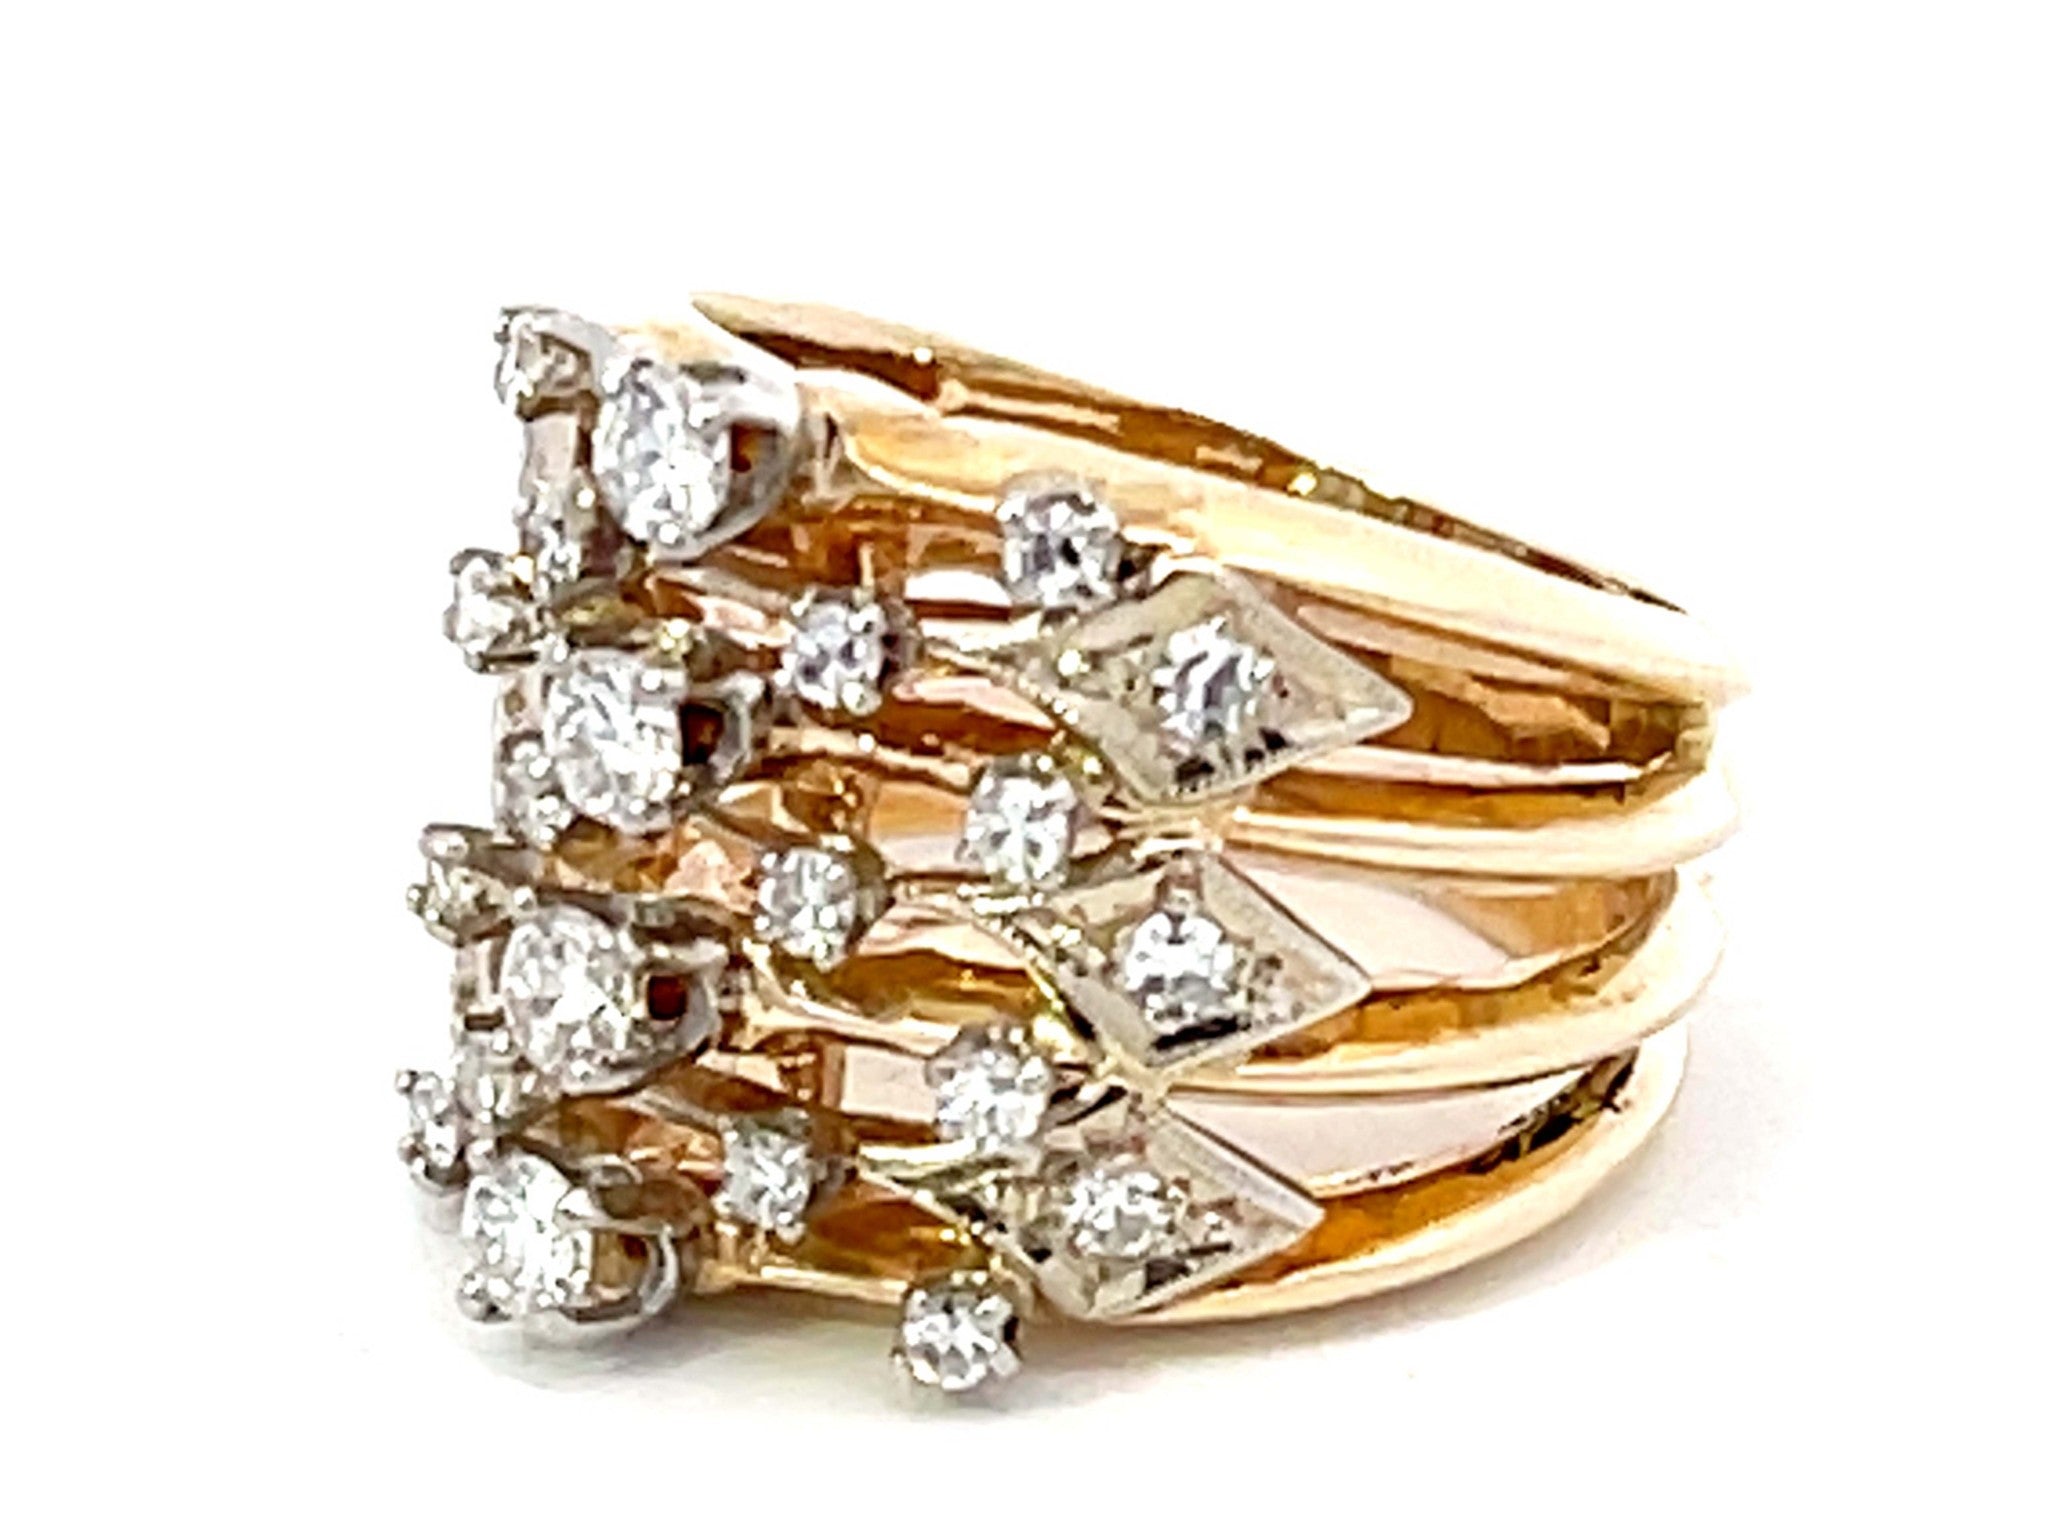 Wide Diamond Band Cutout Design Ring in 14K Yellow Gold